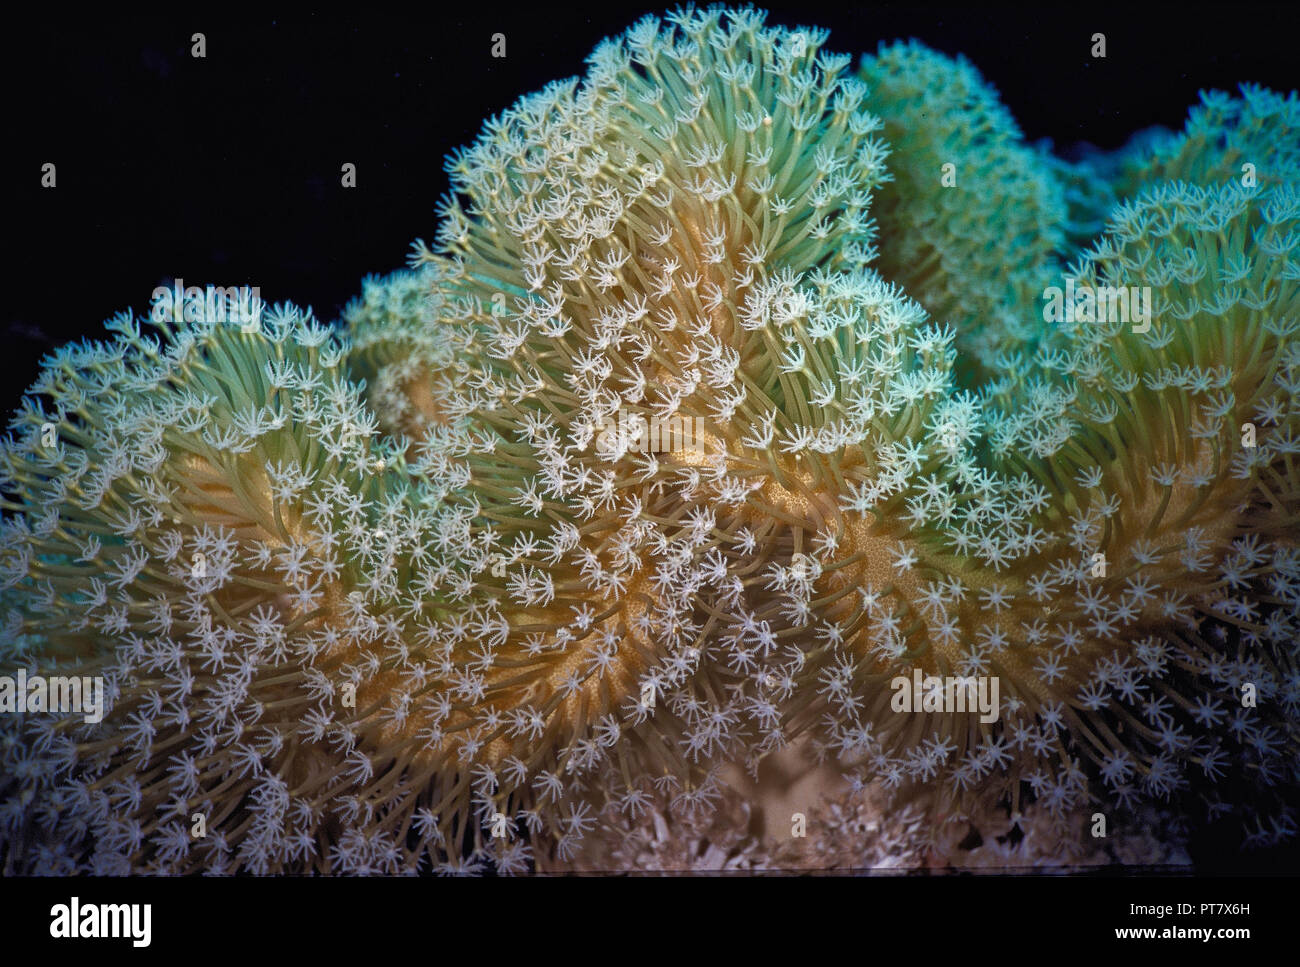 This soft leather coral (Sarcophyton elegans: diameter 30 cms.) is found commonly on reefs in the Indo-Pacific region. Attached to the substrate by a short thick stalk, its 'mushroom-shaped' top - called a capitulum - extends into the water column in a series of folds. When resting, the polyps are retracted, giving the colony a smooth appearance. The leathery base contains toxins, which discourages potential predators from eating it. In a current, the colony's many eight-tentacled polyps are extended fully (as in this instance) in order to catch passing zooplankton. Hurghada, Egyptian Red Sea. Stock Photo